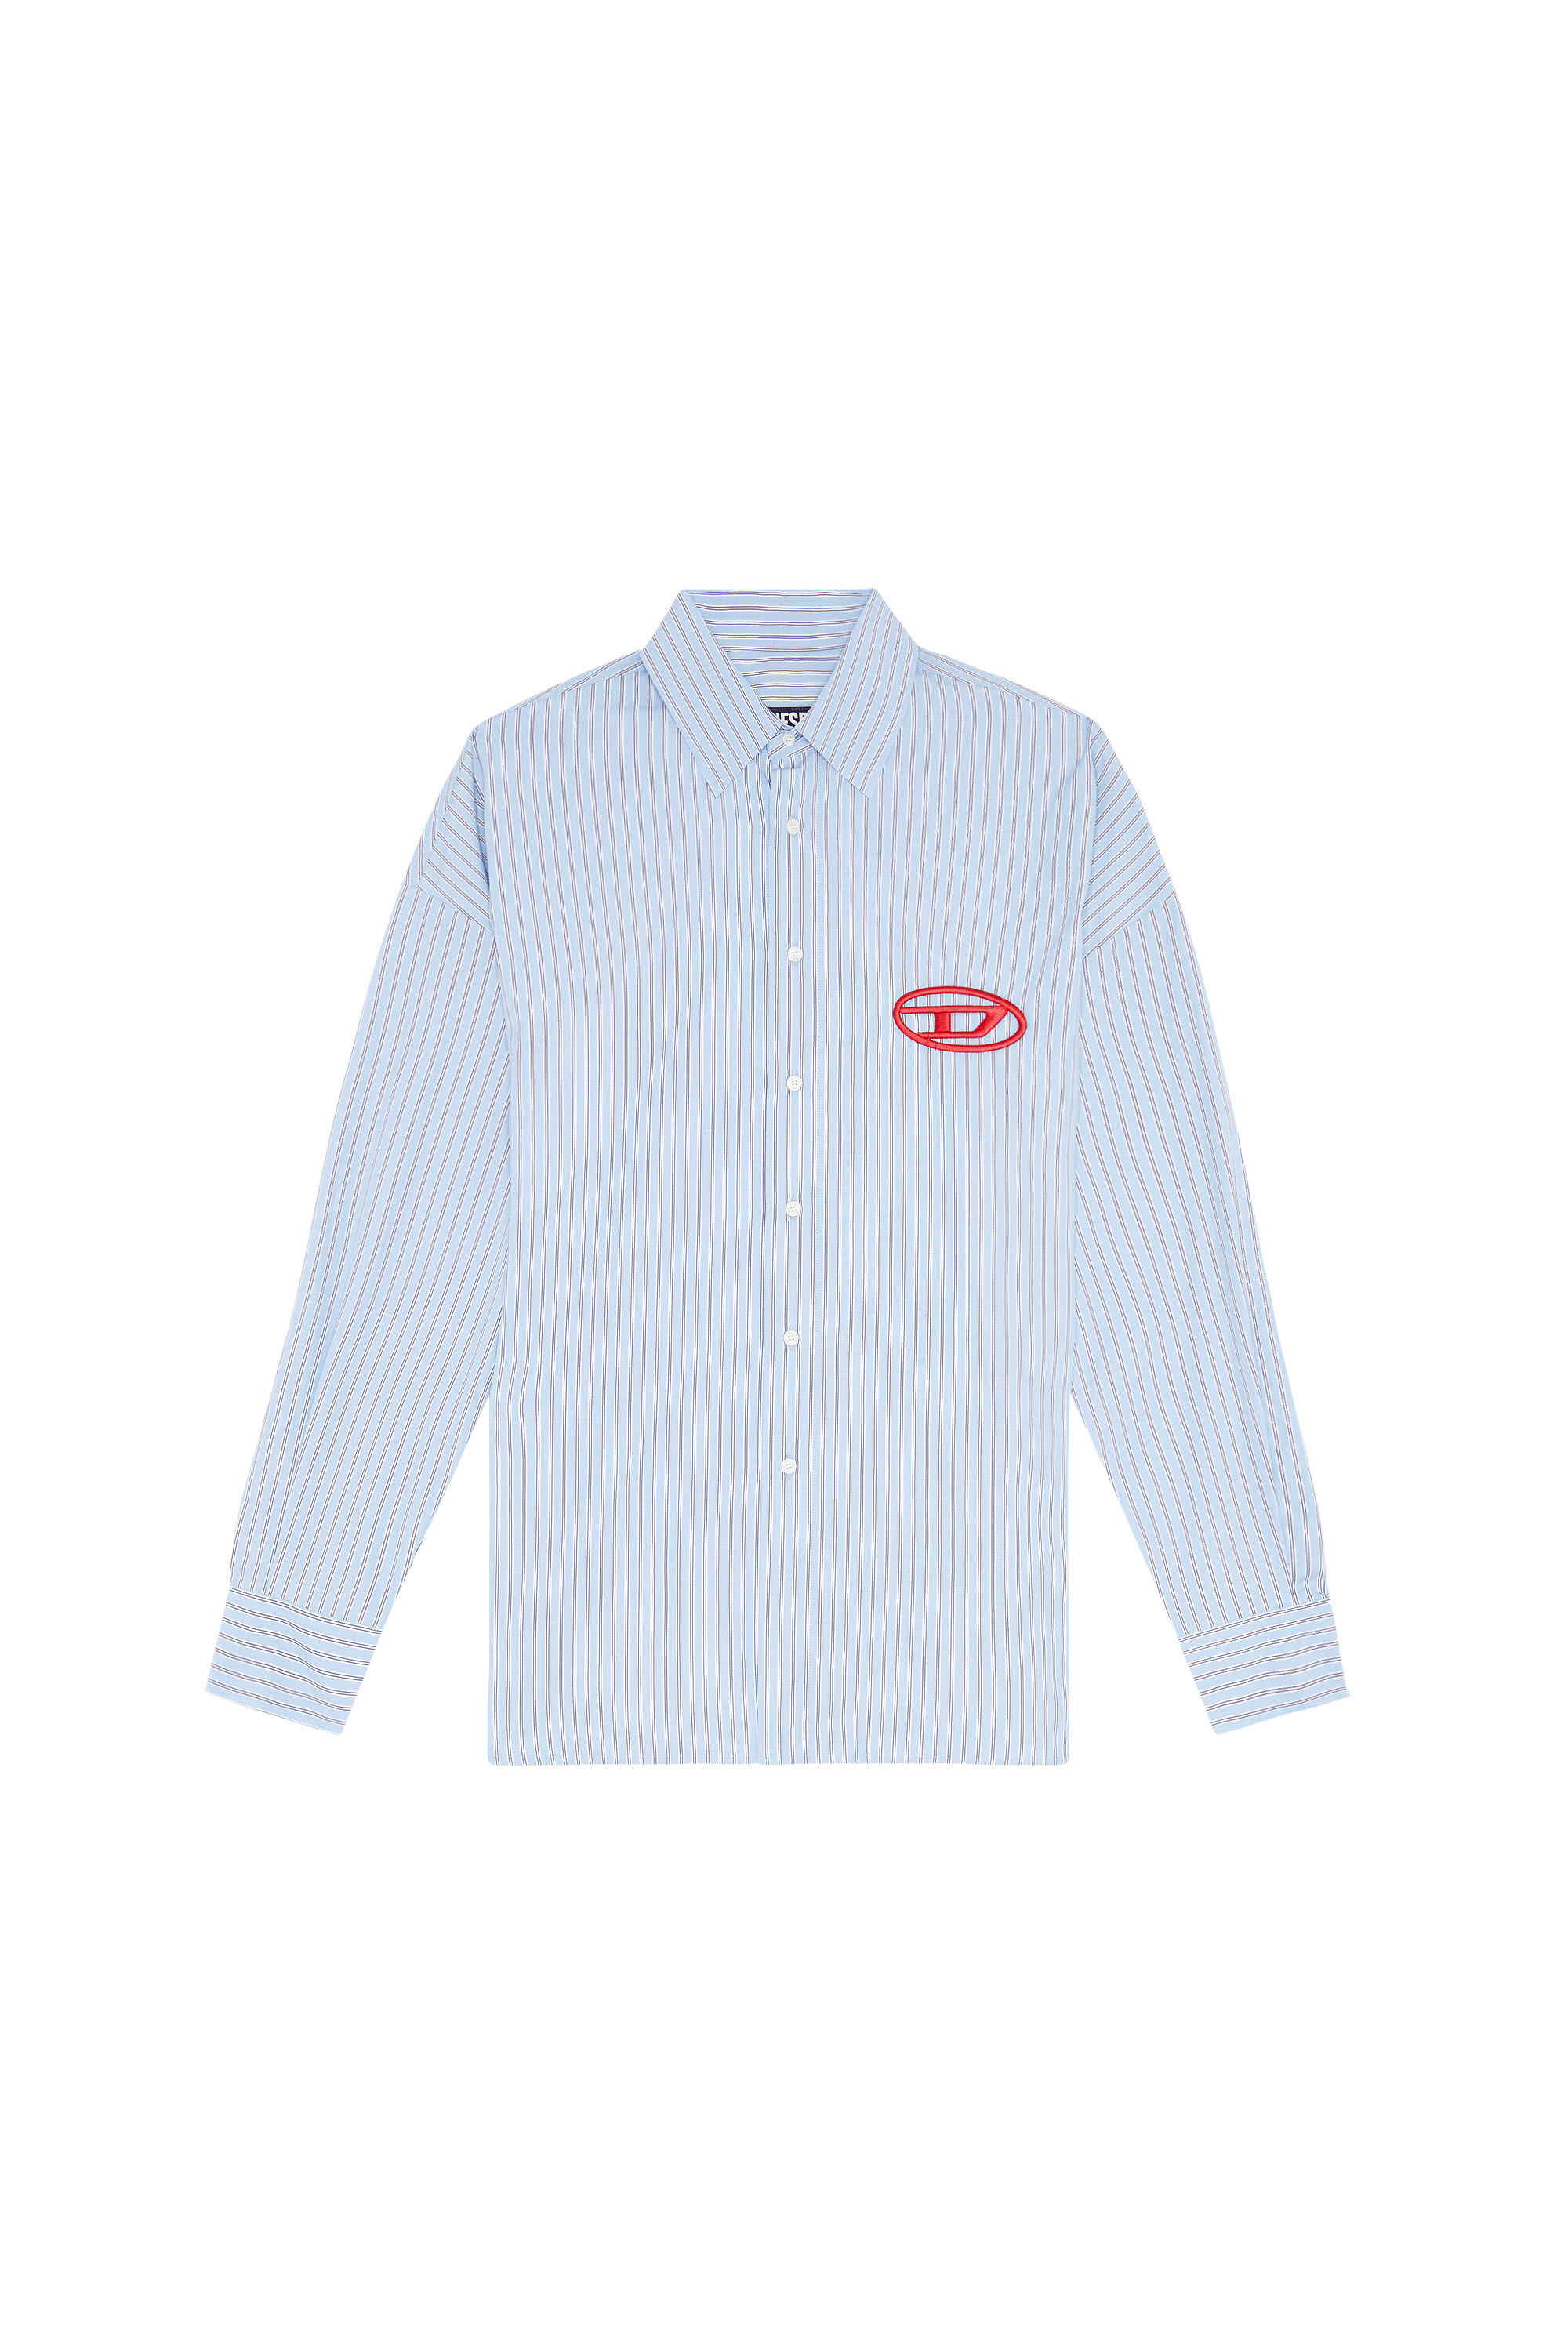 S-DOUBLY-STRIPE-NW Man: Striped shirt with logo embroidery | Diesel